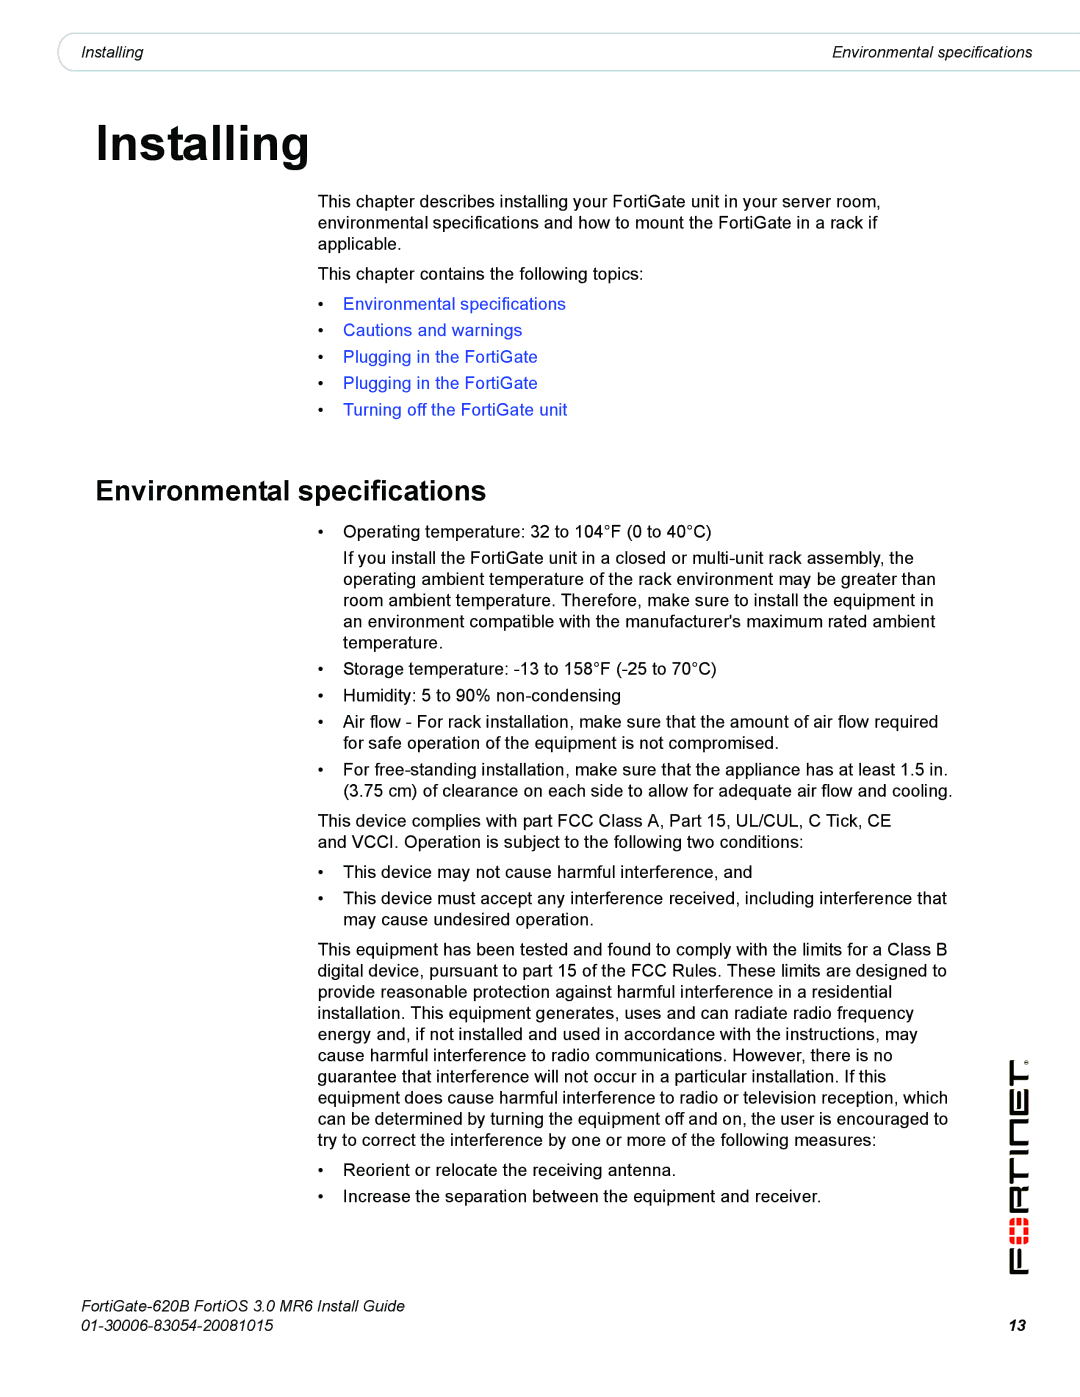 Fortinet 620B manual Installing, Environmental specifications 